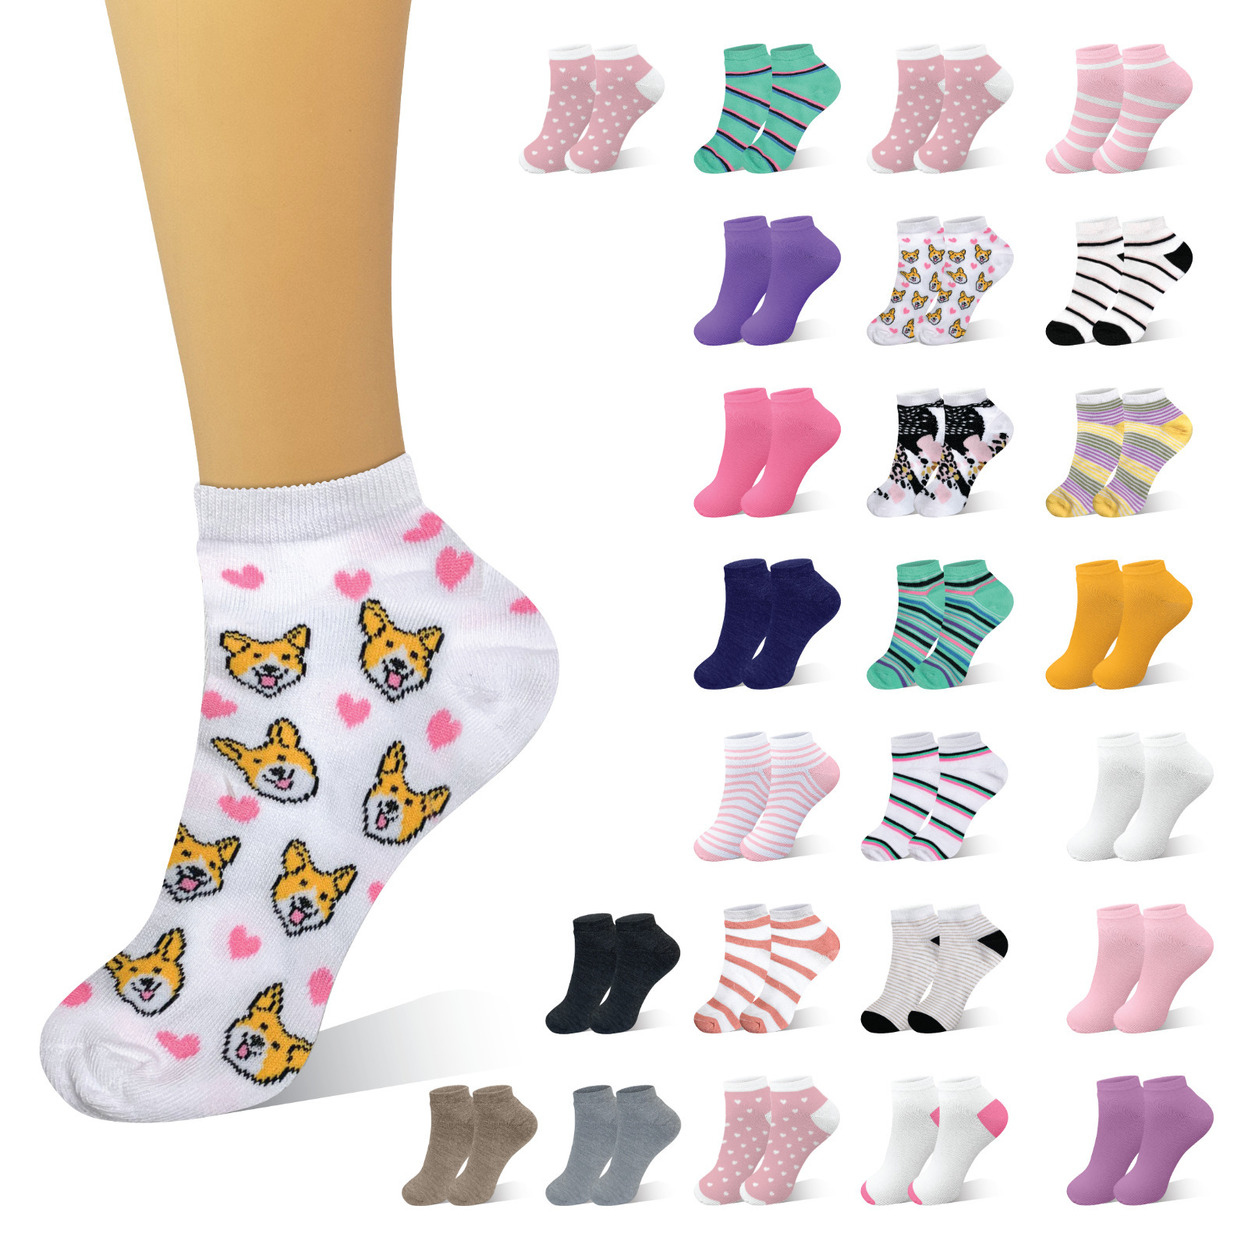 40-Pairs: Women’s Breathable Fun-Funky Colorful No Show Low Cut Ankle Socks